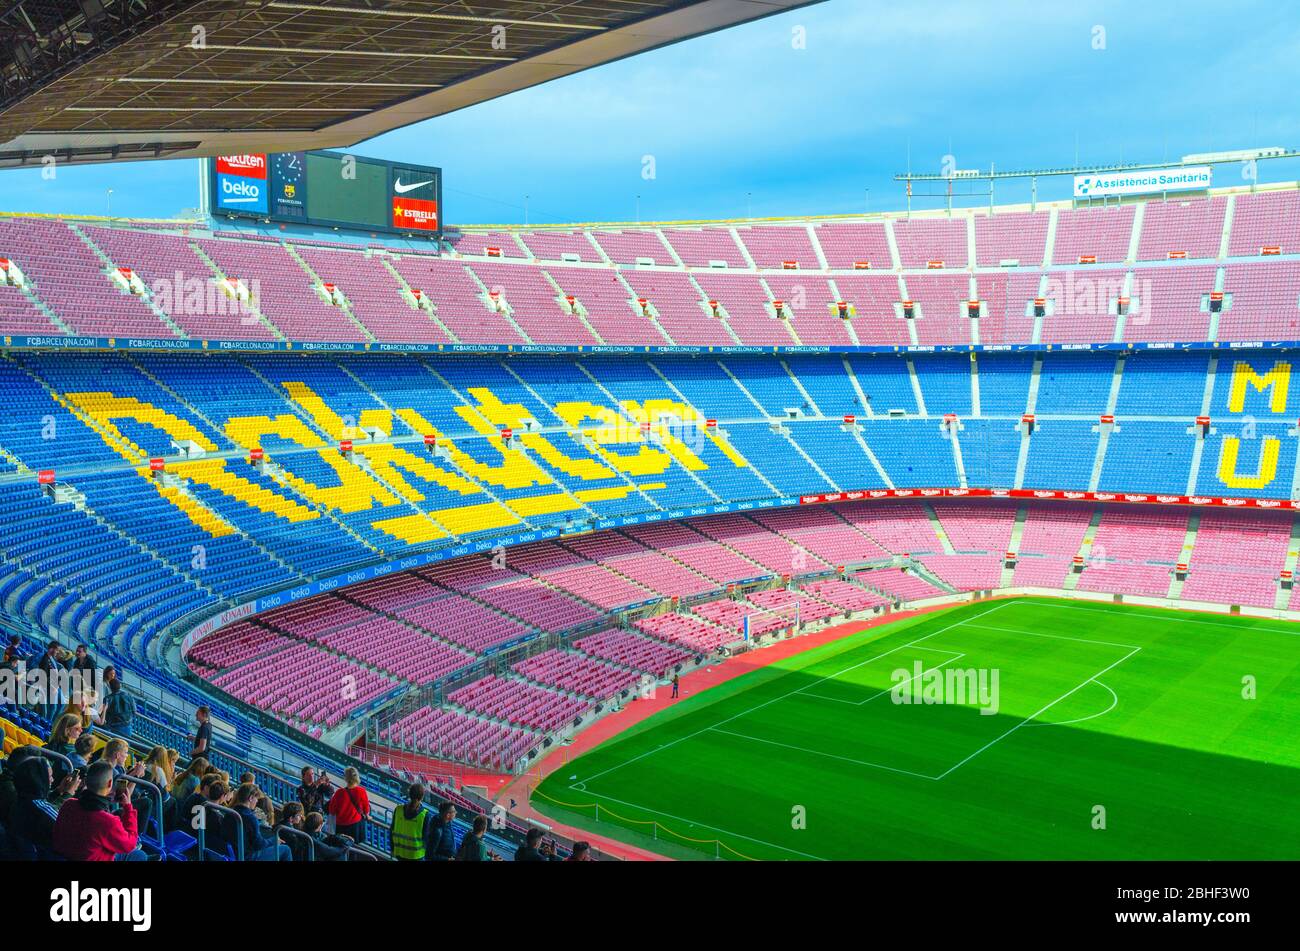 Barcelona, Spain, March 14, 2019: Camp Nou is the home stadium of football club Barcelona, the largest stadium in Spain. Top aerial view of tribunes stands, green grass field and scoreboard. Stock Photo